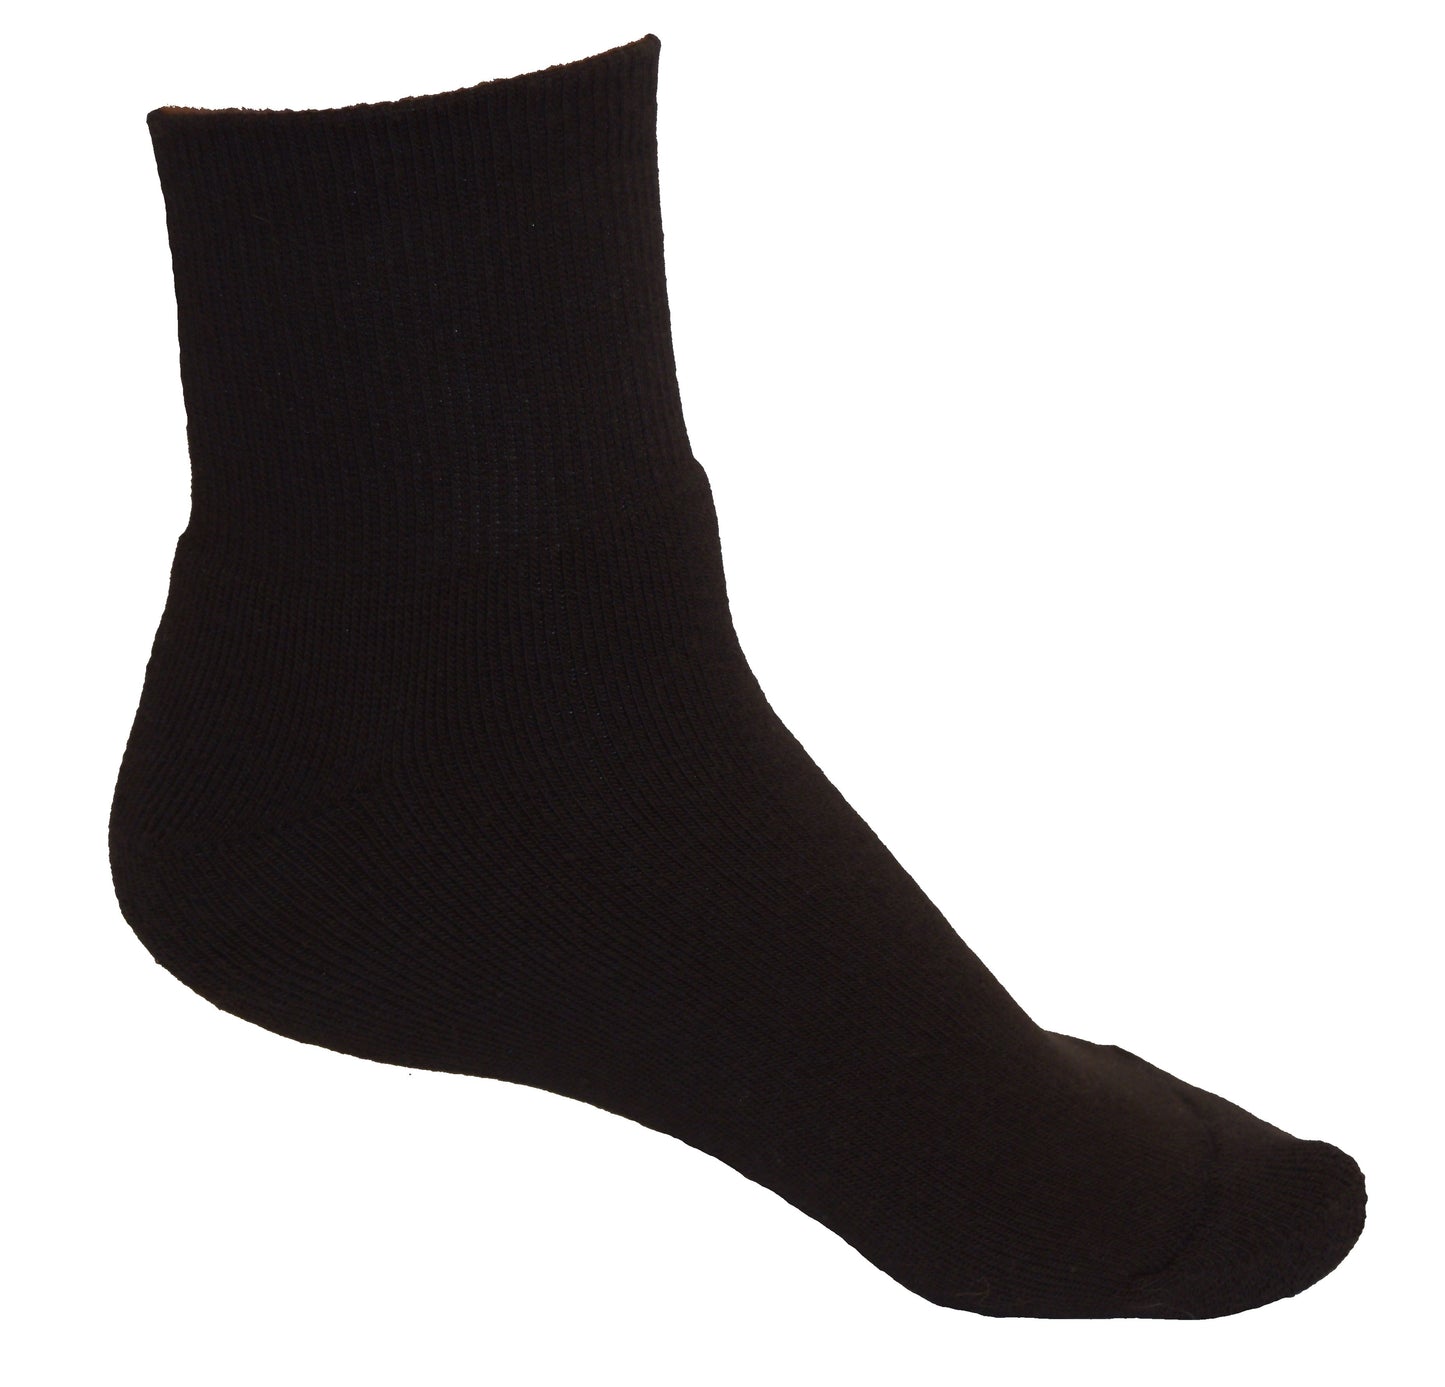 Cushees Comfort™ Ankle Socks, Double Thick